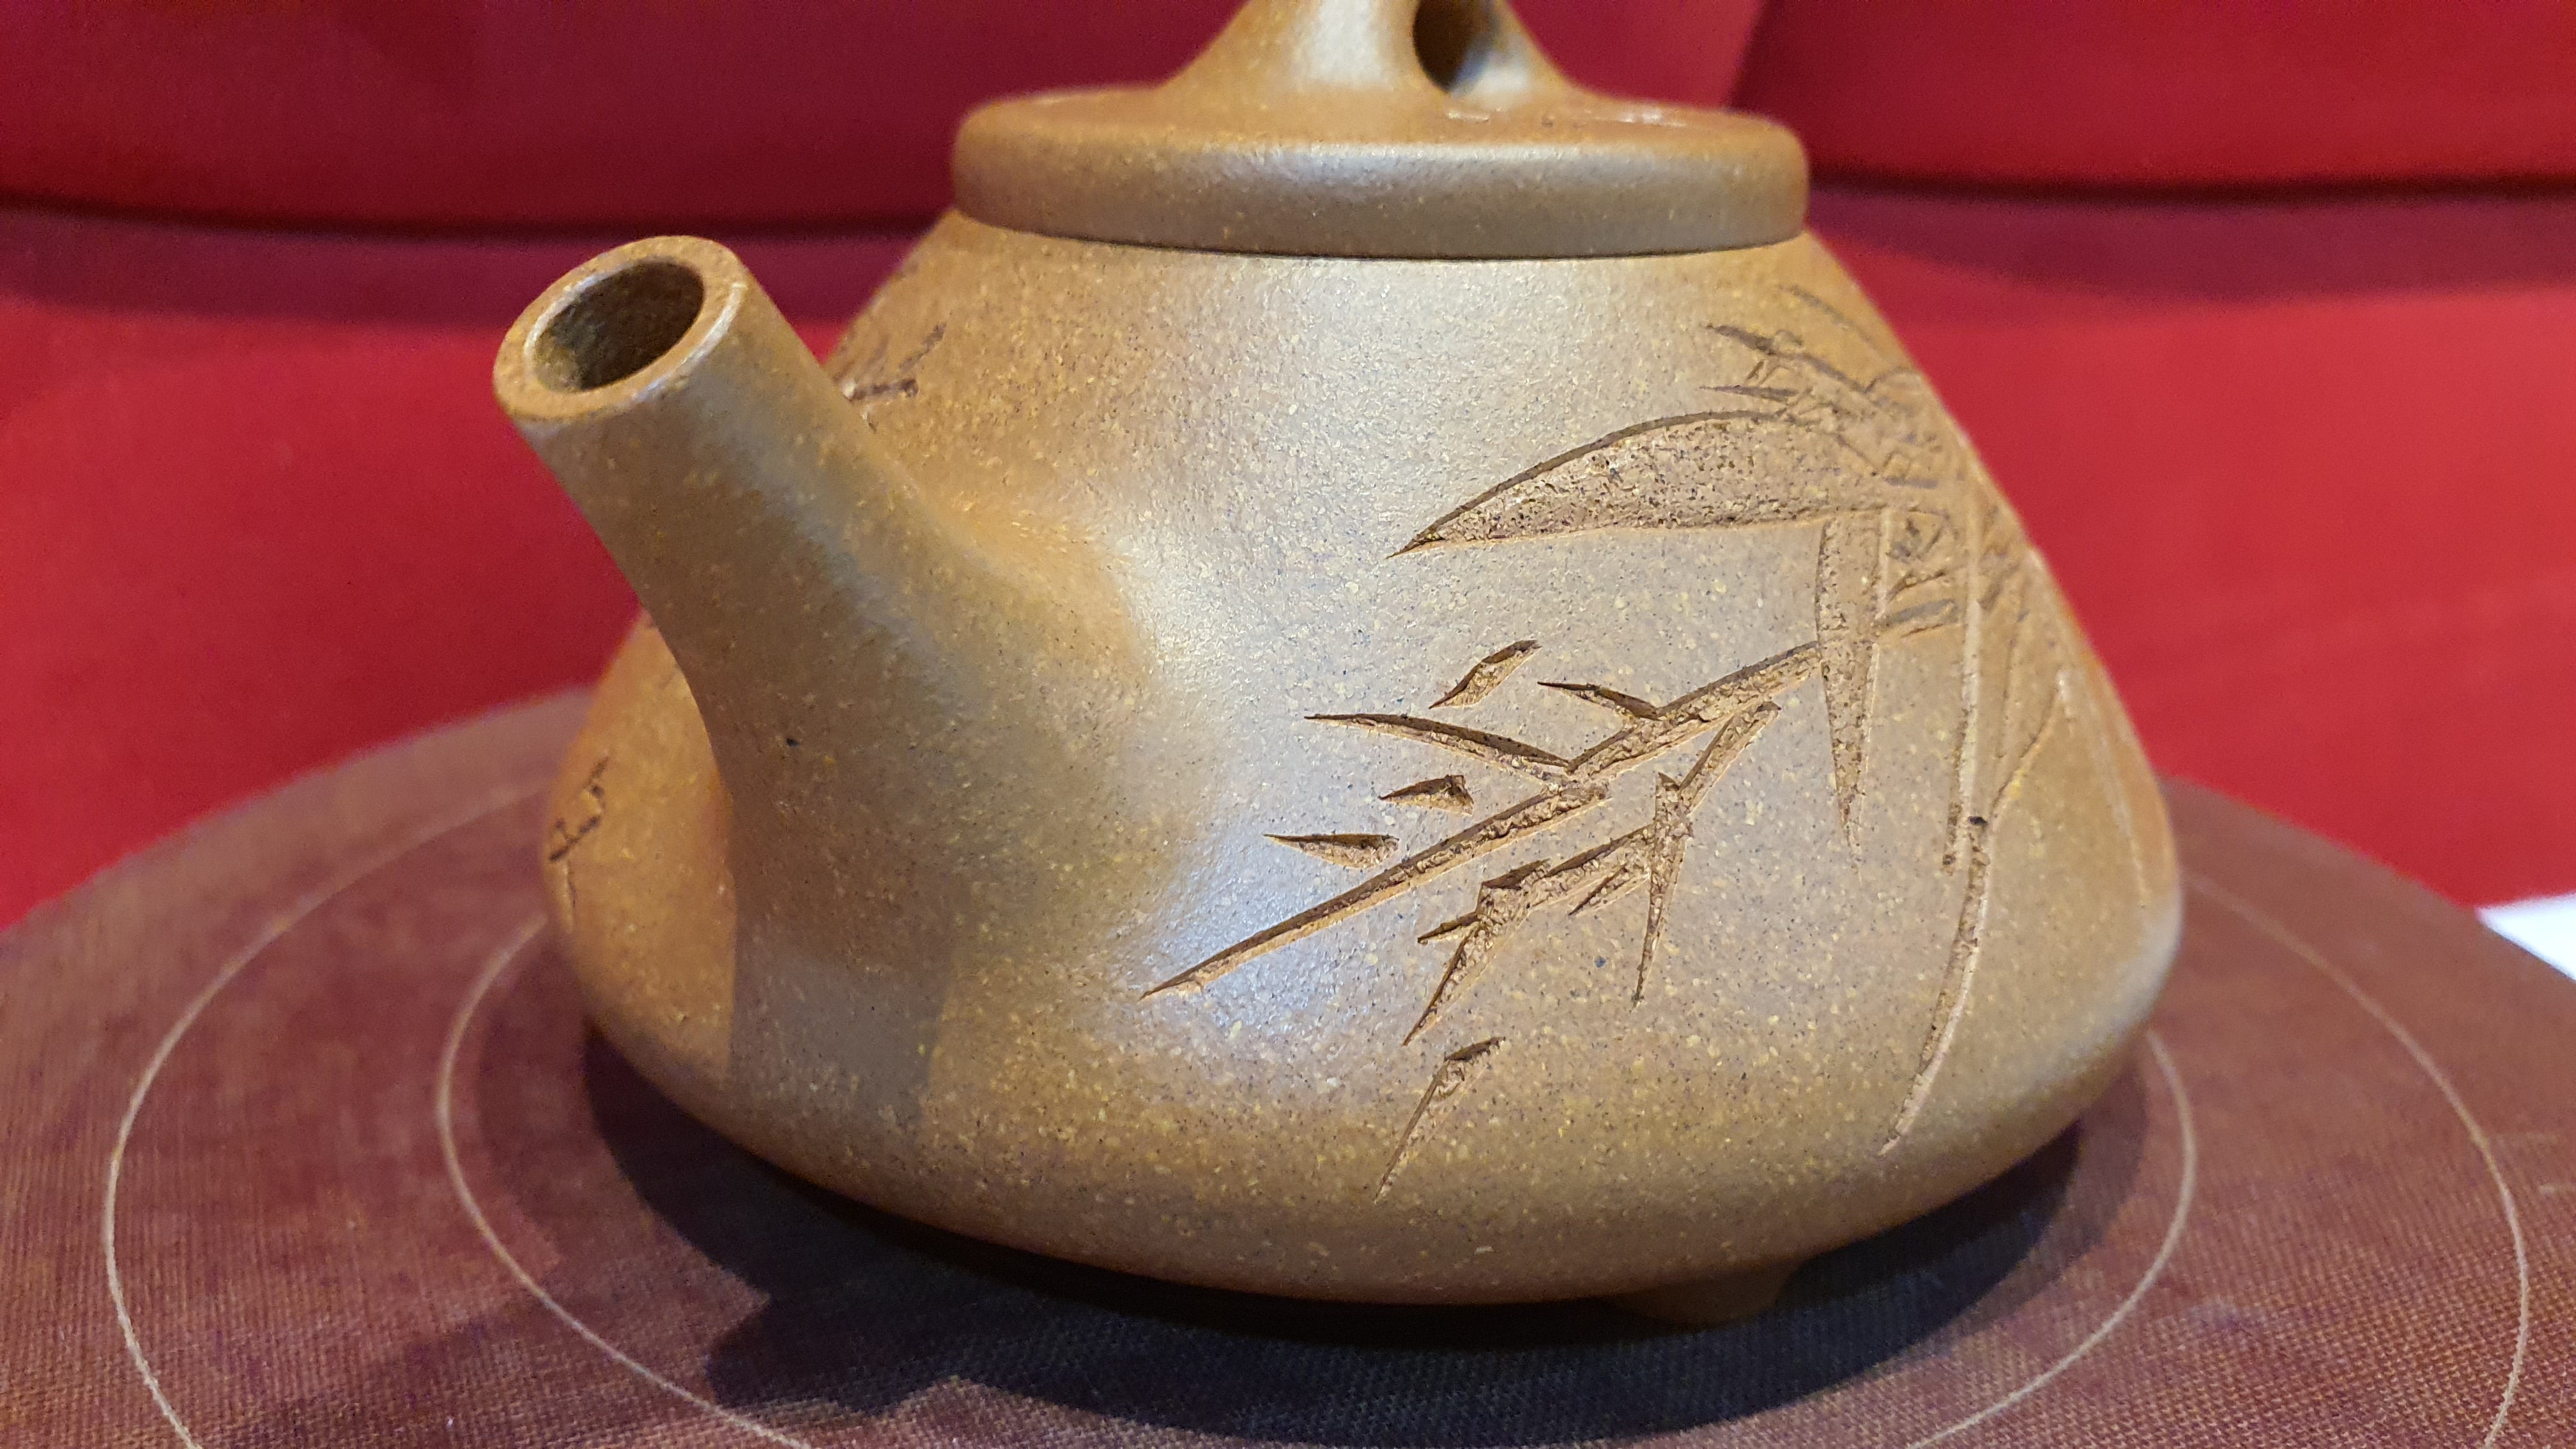 Zi Ye Shi Piao 子冶石瓢 with engraving 带刻绘, made of Lao Duan Ni 老段泥 200ml, by our collaborative Craftsman 史云峰。